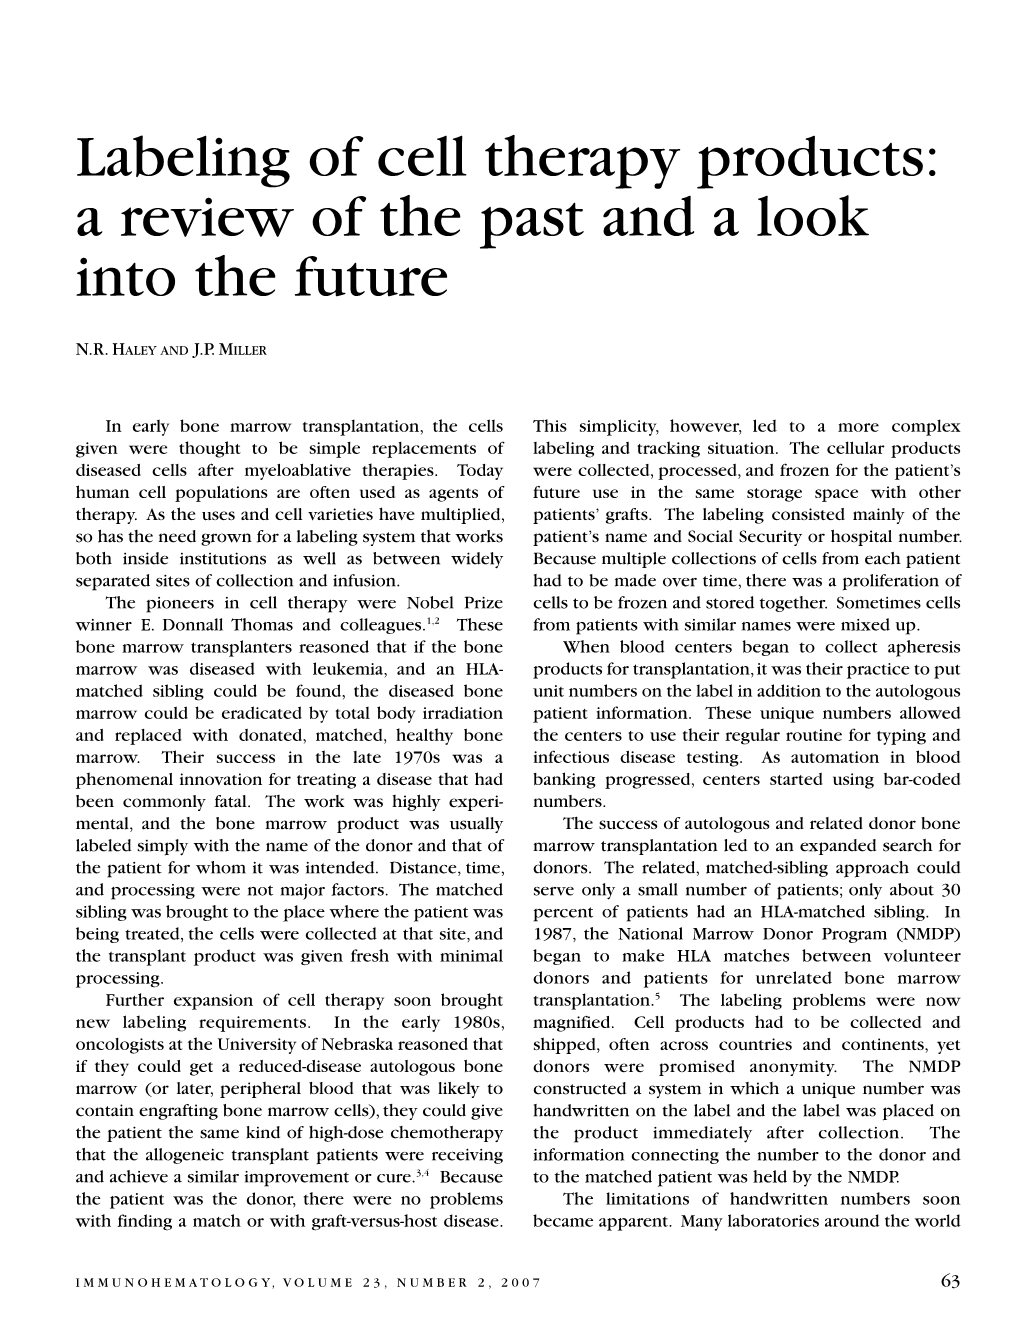 Labeling of Cell Therapy Products: a Review of the Past and a Look Into the Future